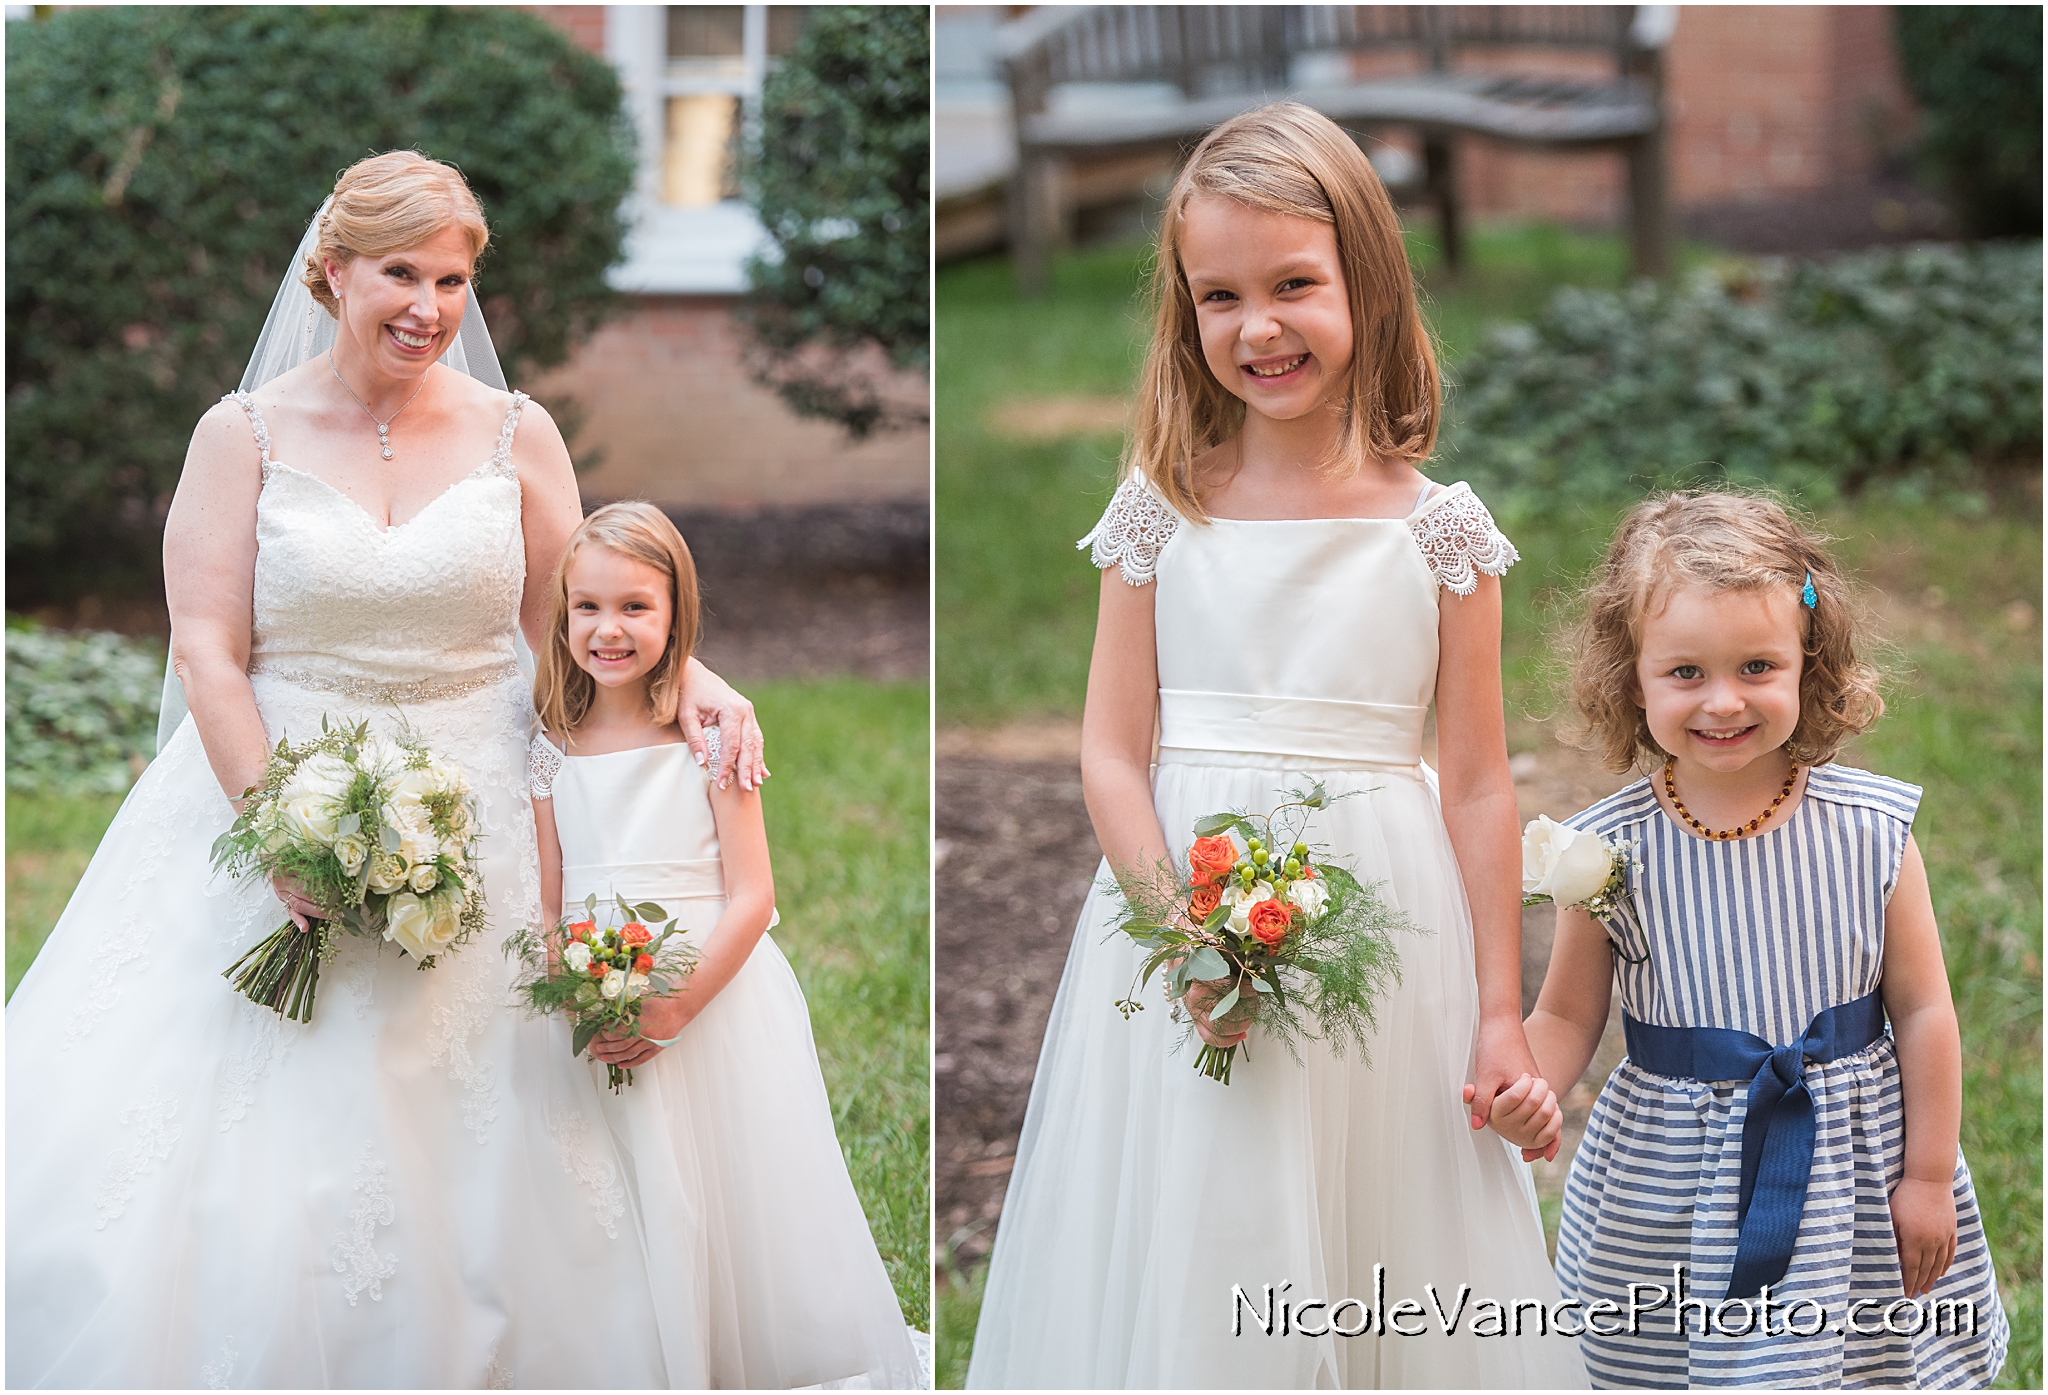 The bride with her flower girl... aren't these little girls so cute?